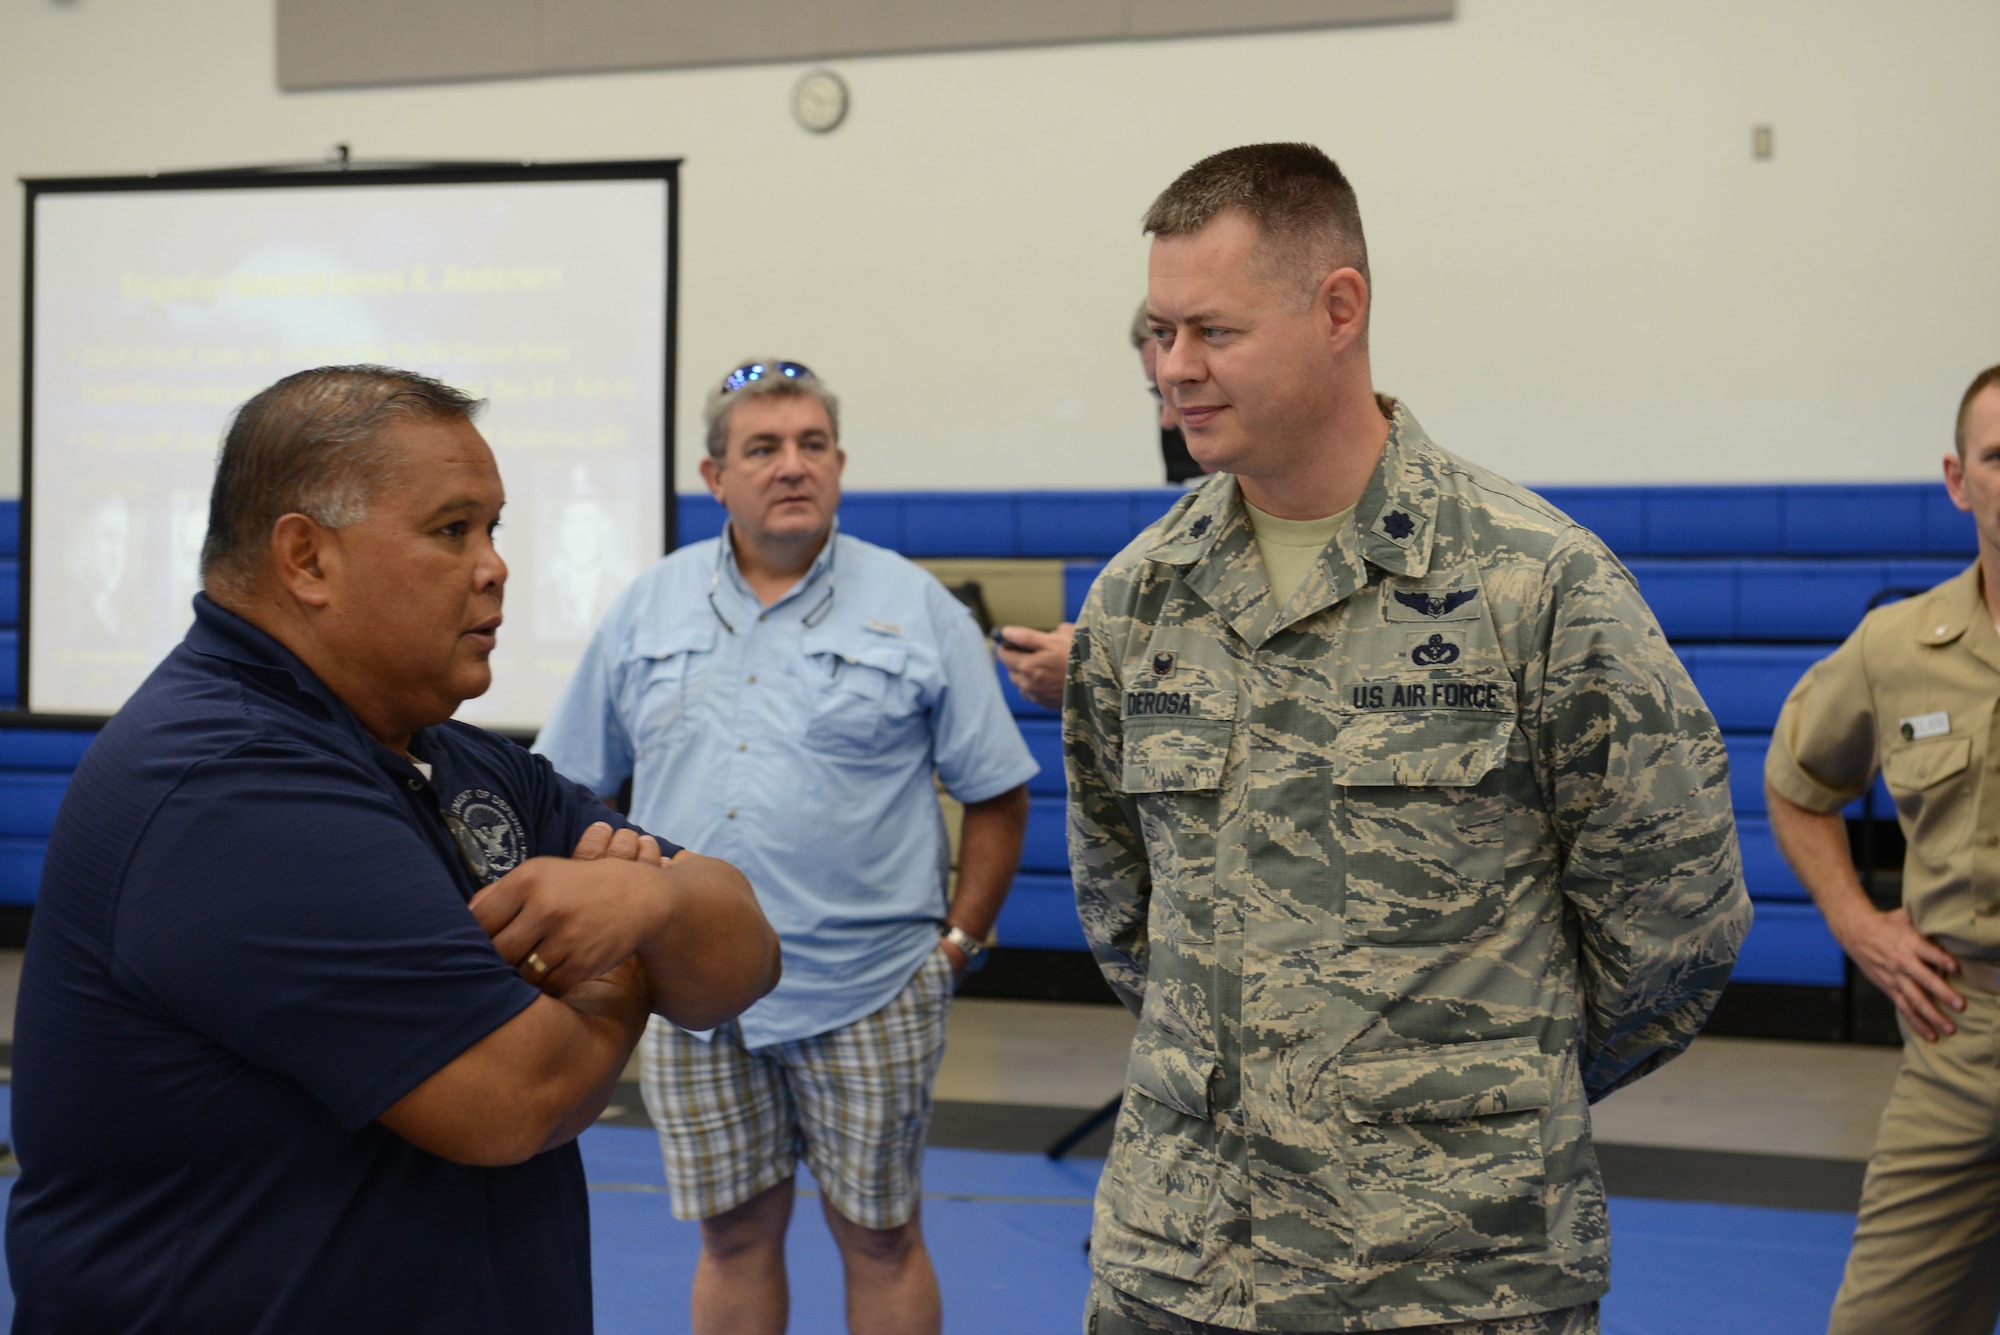 Lt Col. Andrew Derosa, 554th RED HORSE Squadron commander, interacts with retirees at the Coral Reef Fitness Center Nov. 15 2014 on Andersen Air Force Base Guam. The retirees shared stories from their time served in the Armed Forces with active duty military members in attendance. (U.S. Air Force Photo by Senior Airman Adarius Petty.)